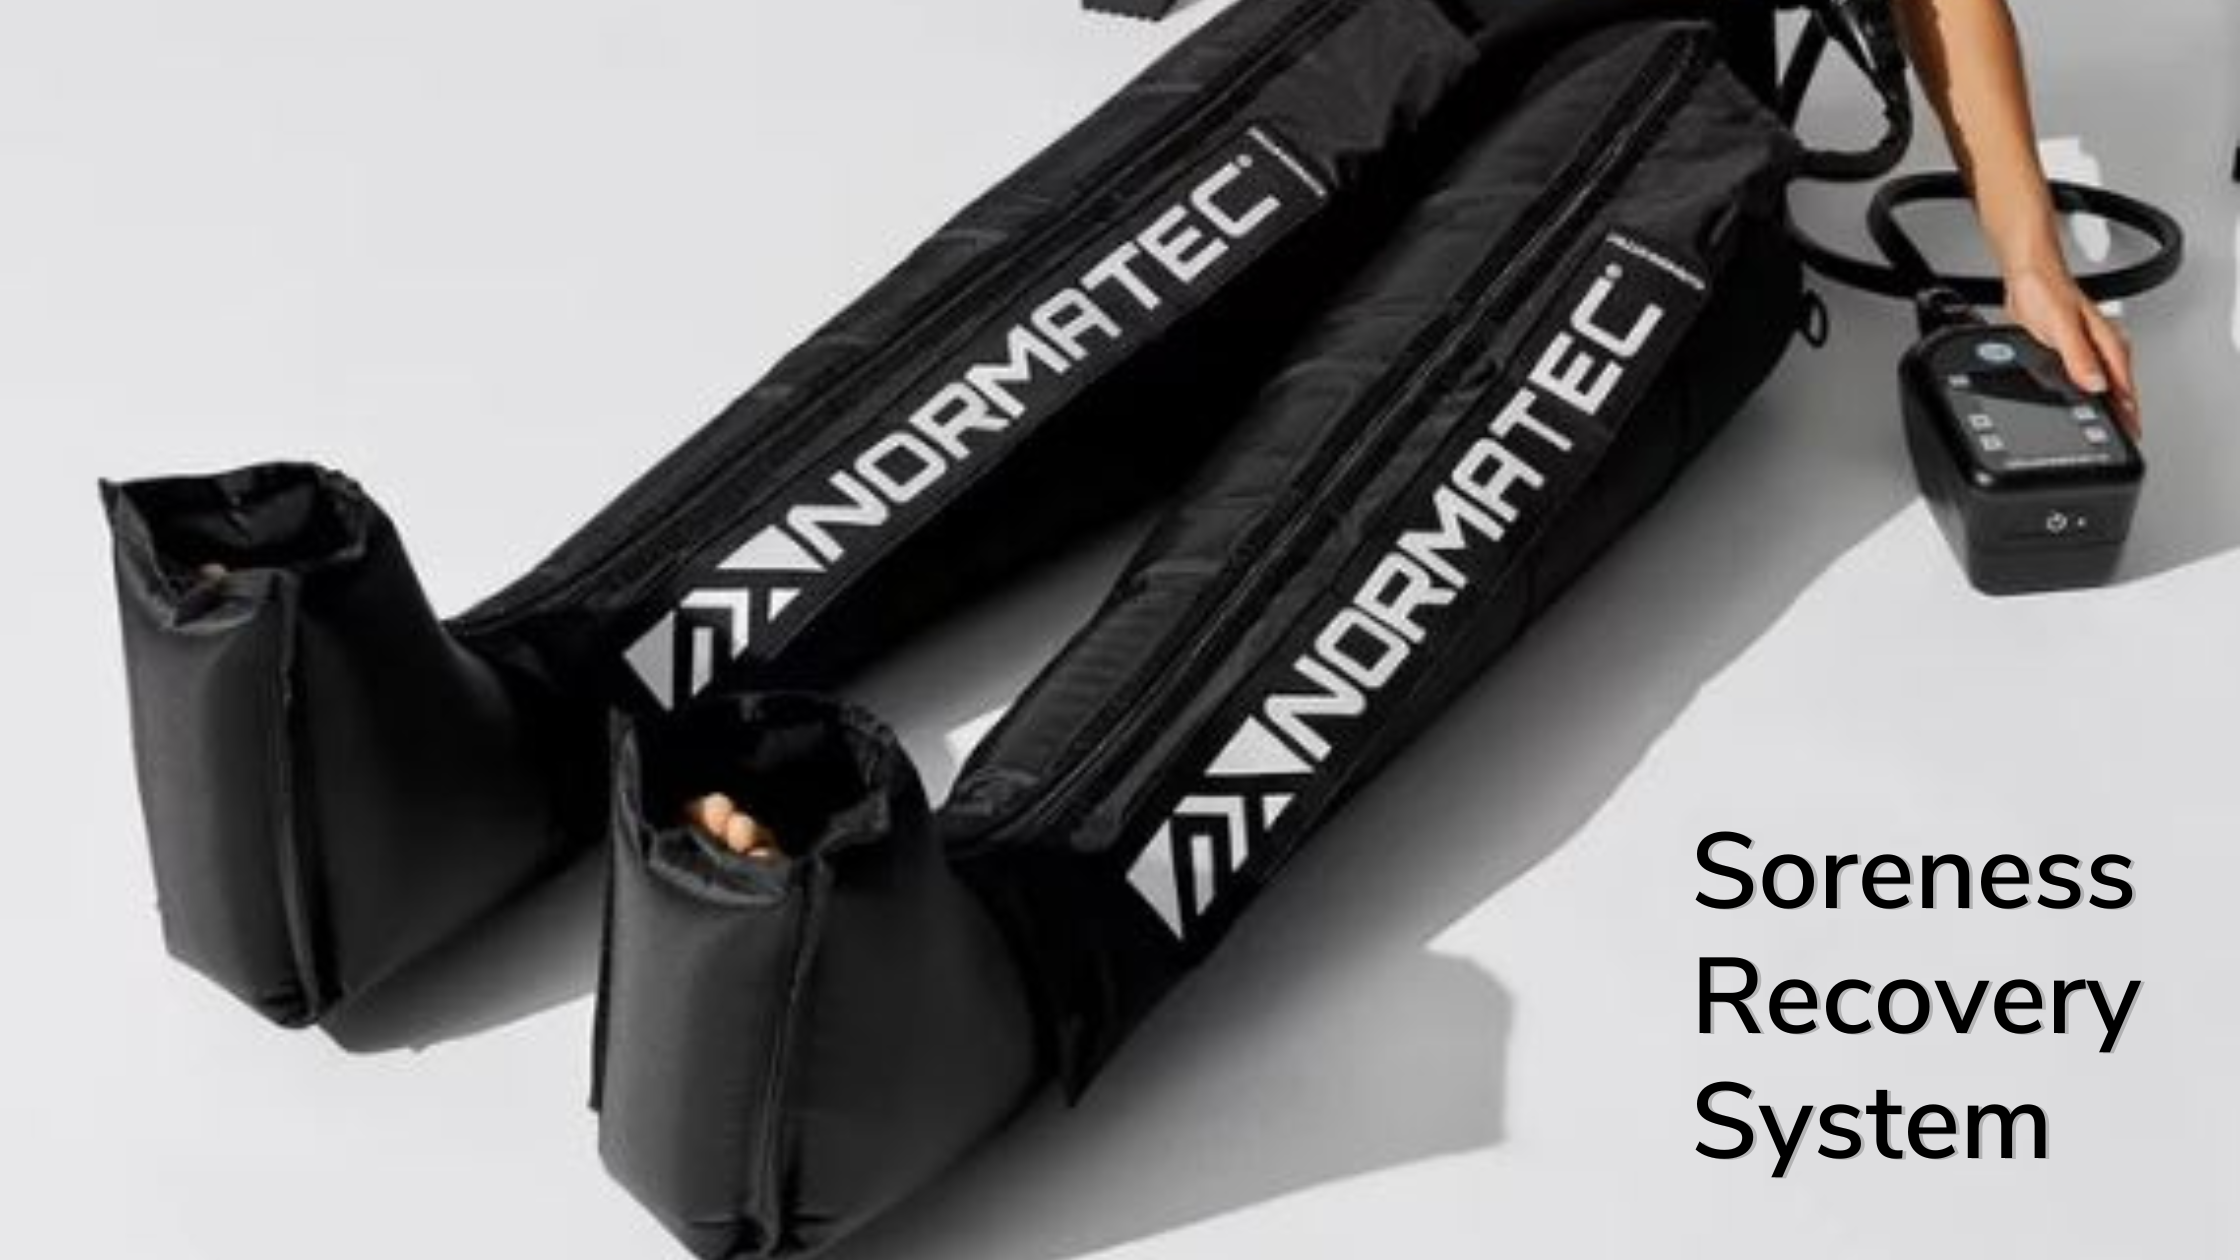 Normatec: Soreness and Recovery